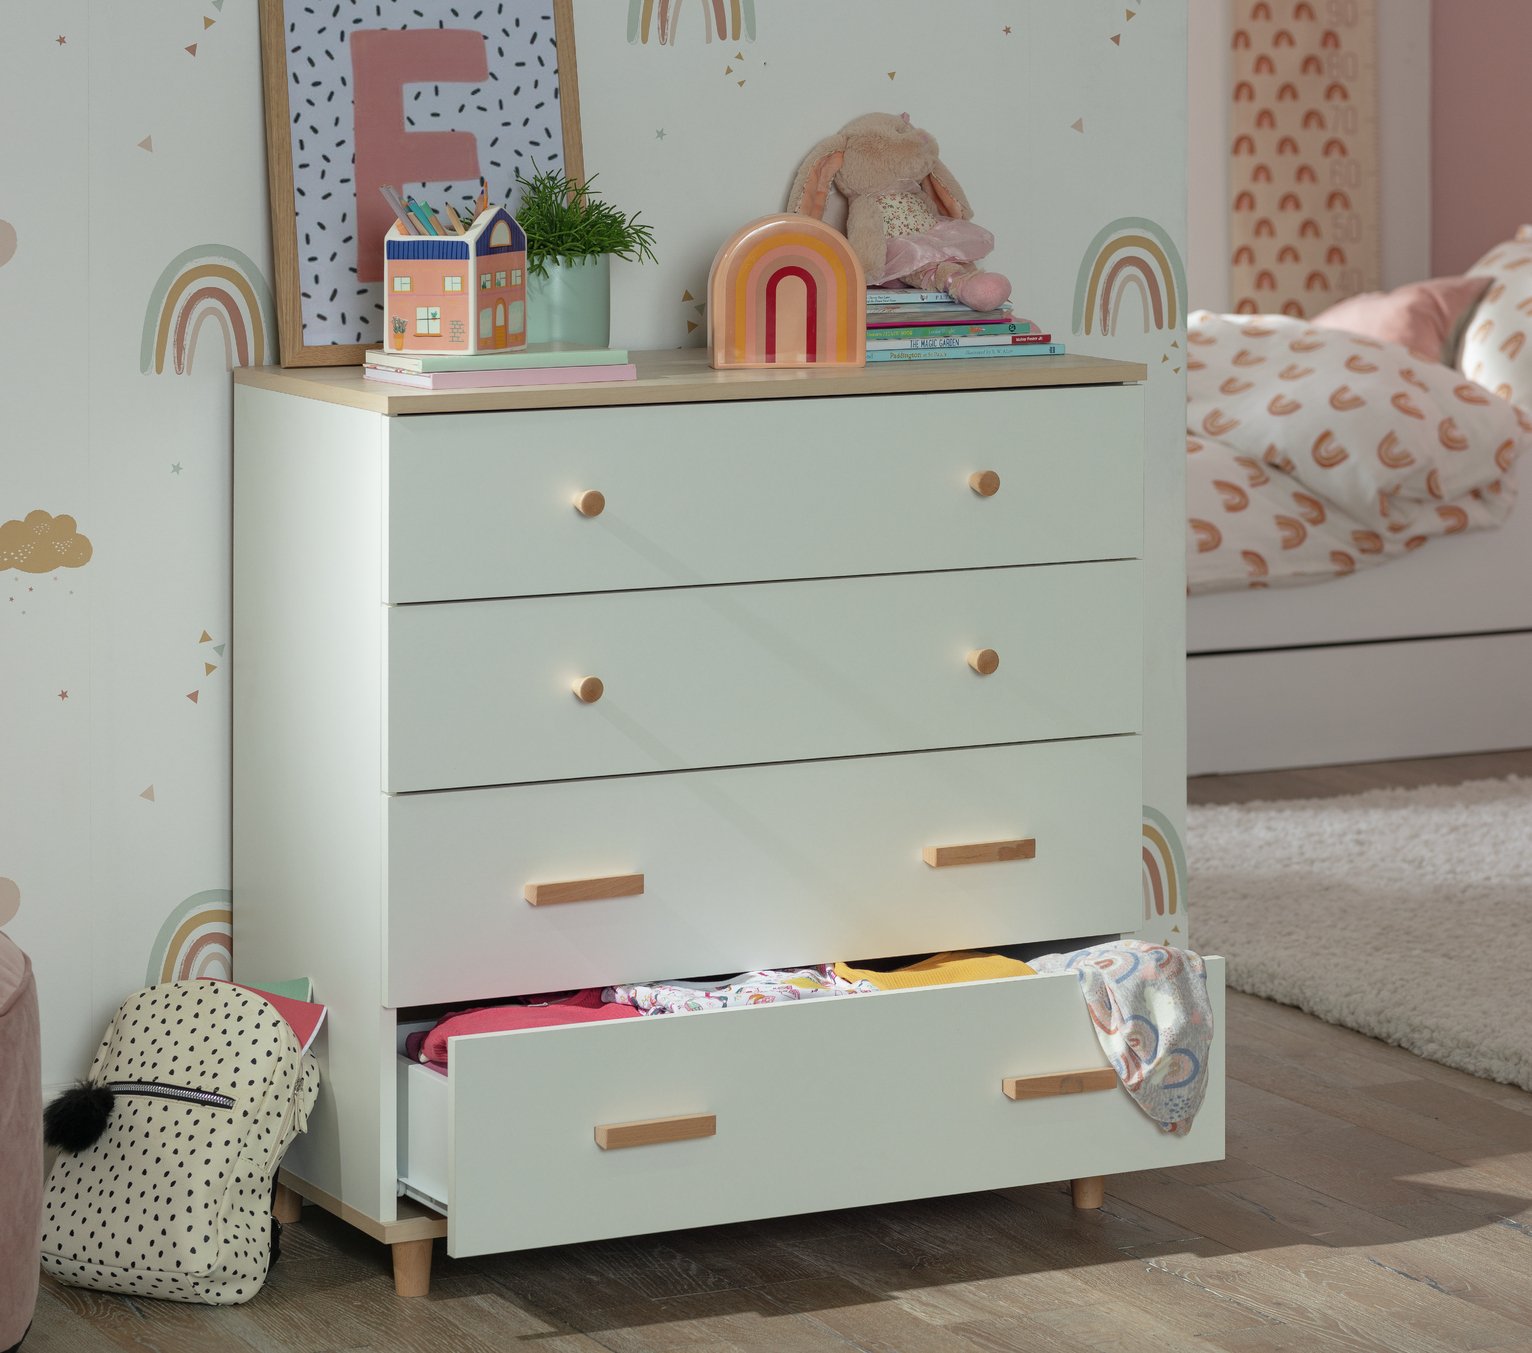 Habitat Melby 4 Chest of Drawers - White and Acacia